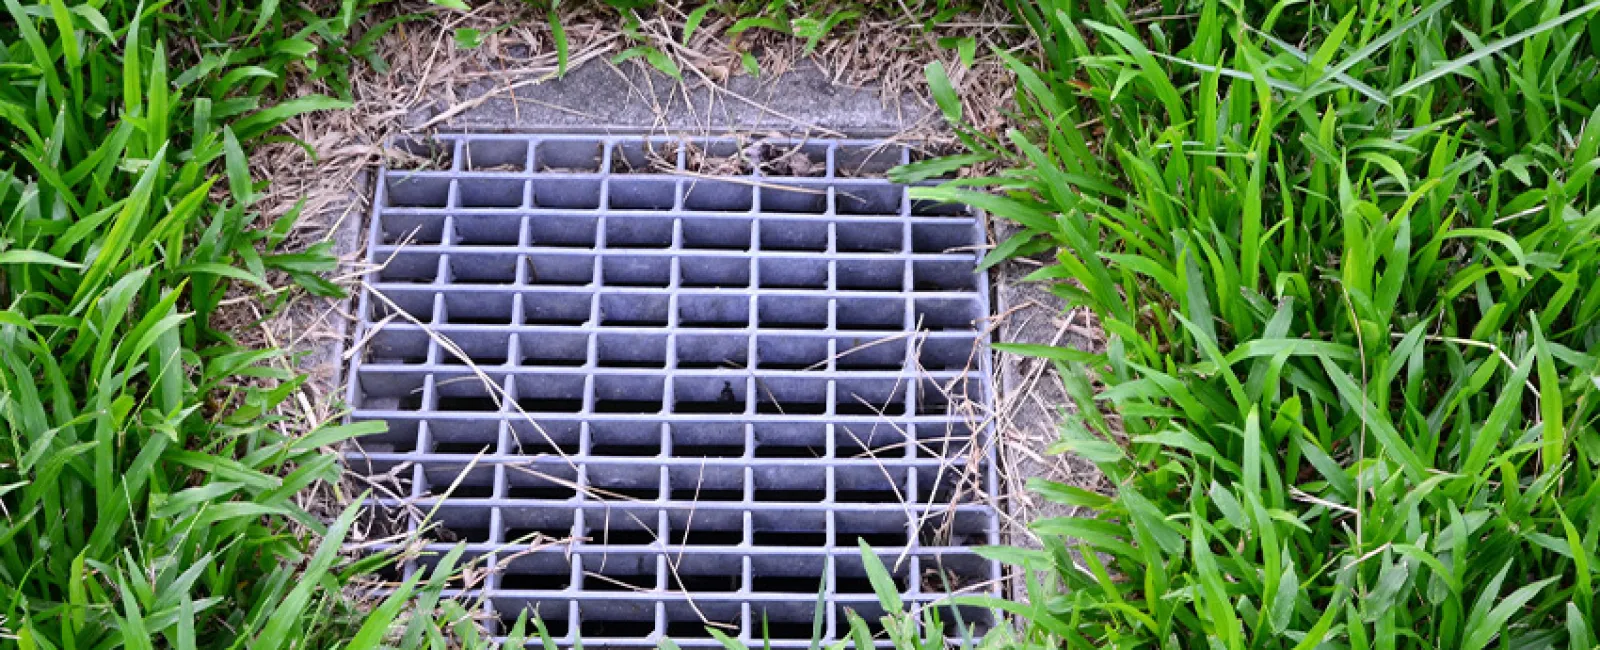 How to Build a Drainage Catch Basin